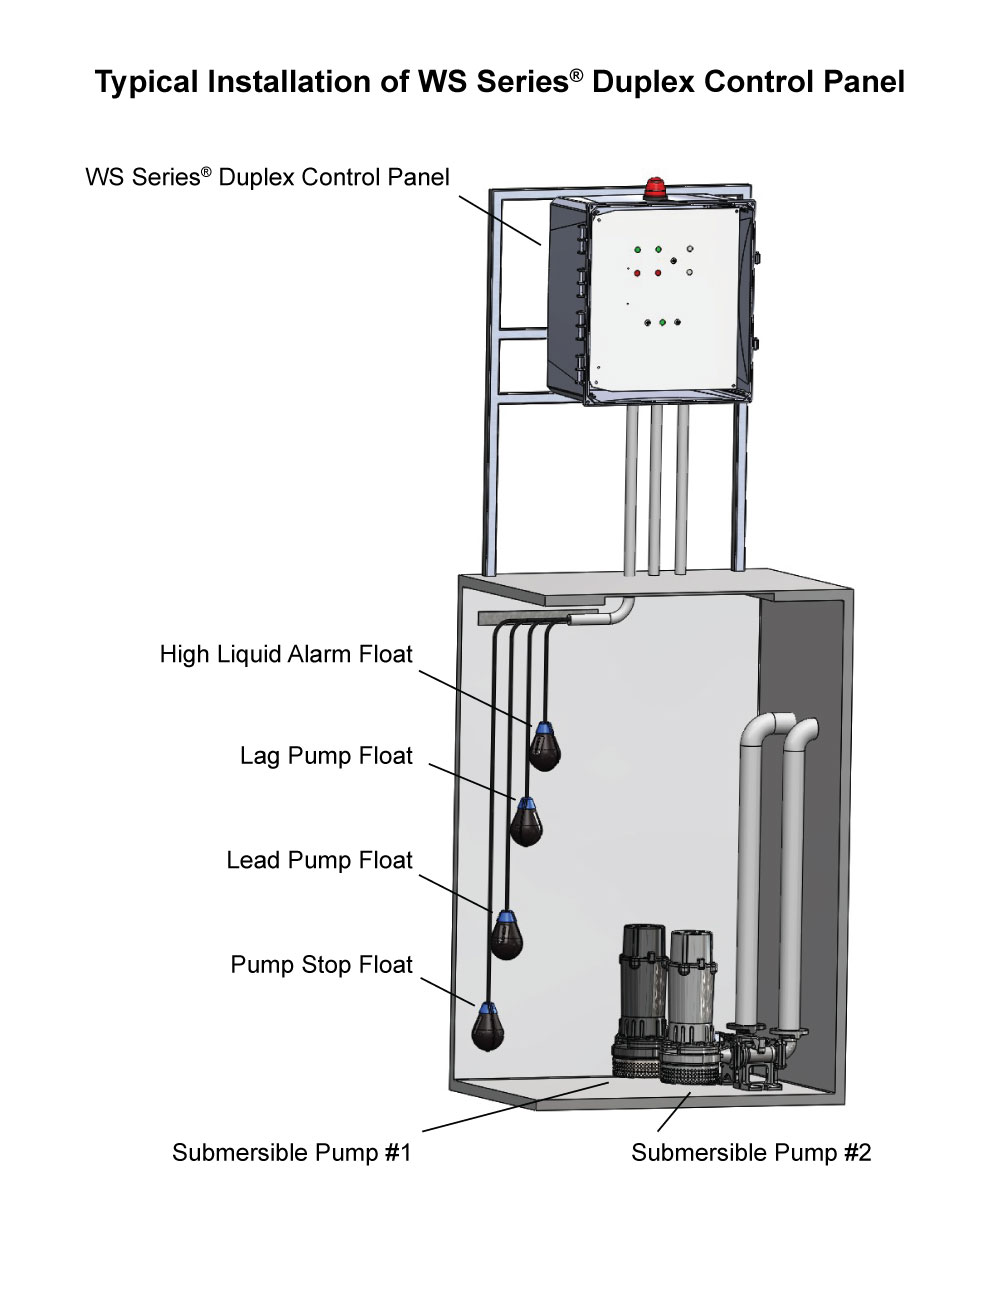 Typical Application: Single Phase Duplex Demand WD1P-4